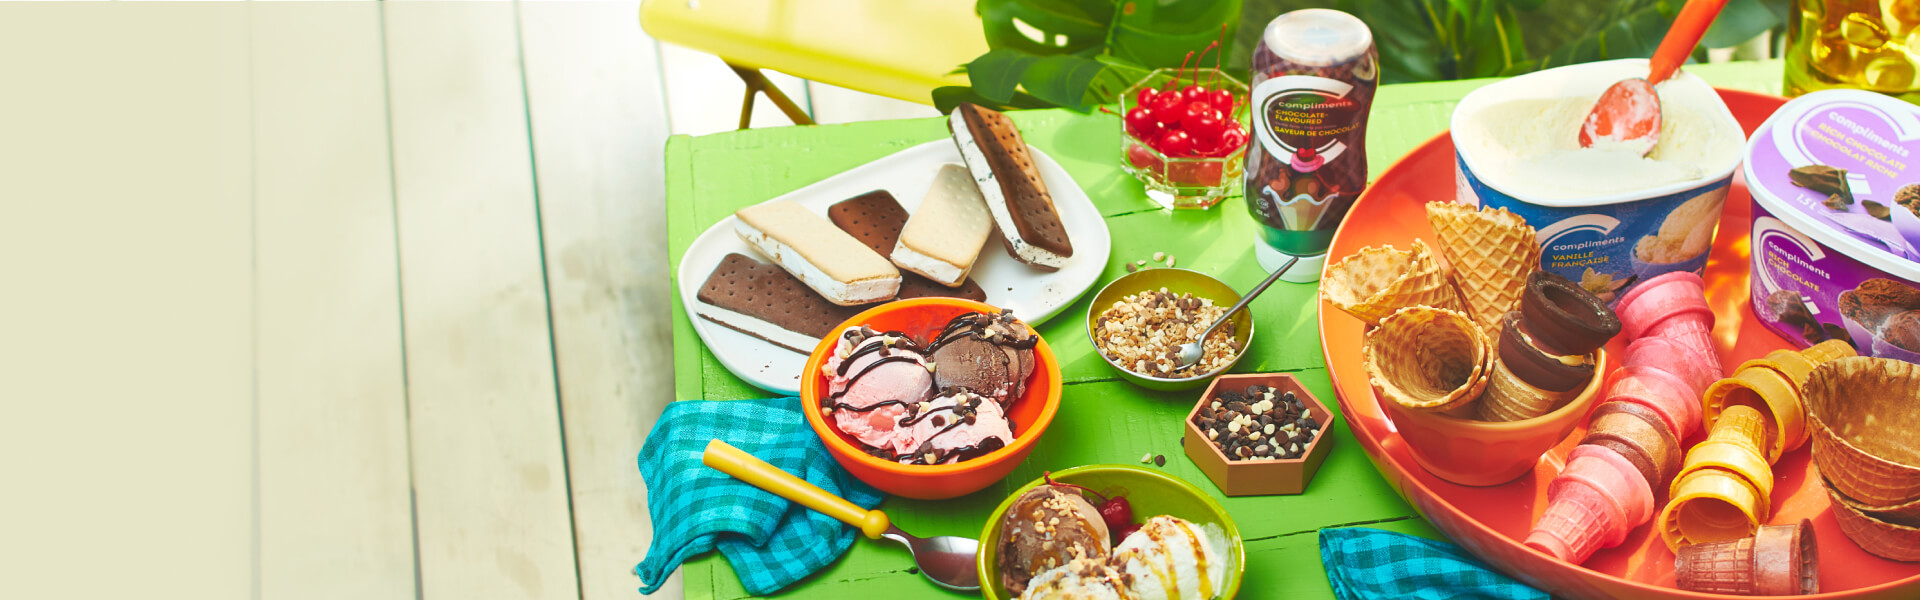 Backyard table setting for an ice cream party, with full ice cream sundae bar and ice cream party supplies